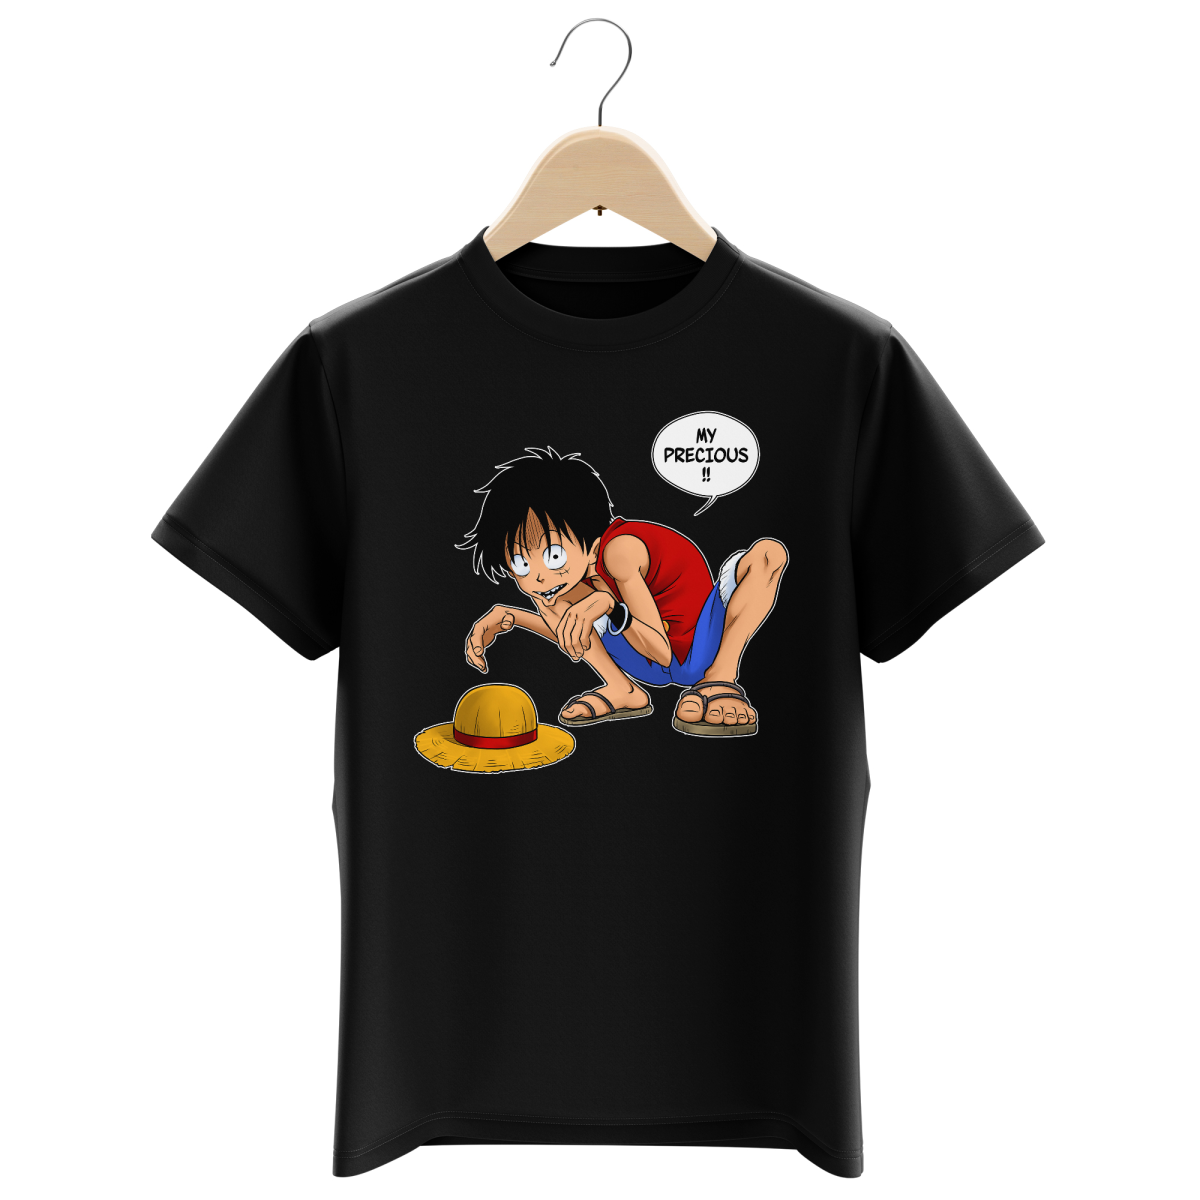 Funny One Piece The Lord Of The Rings Kids T Shirt Monkey D Luffy And Gollum One Piece The Lord Of The Rings Parody Ref 744